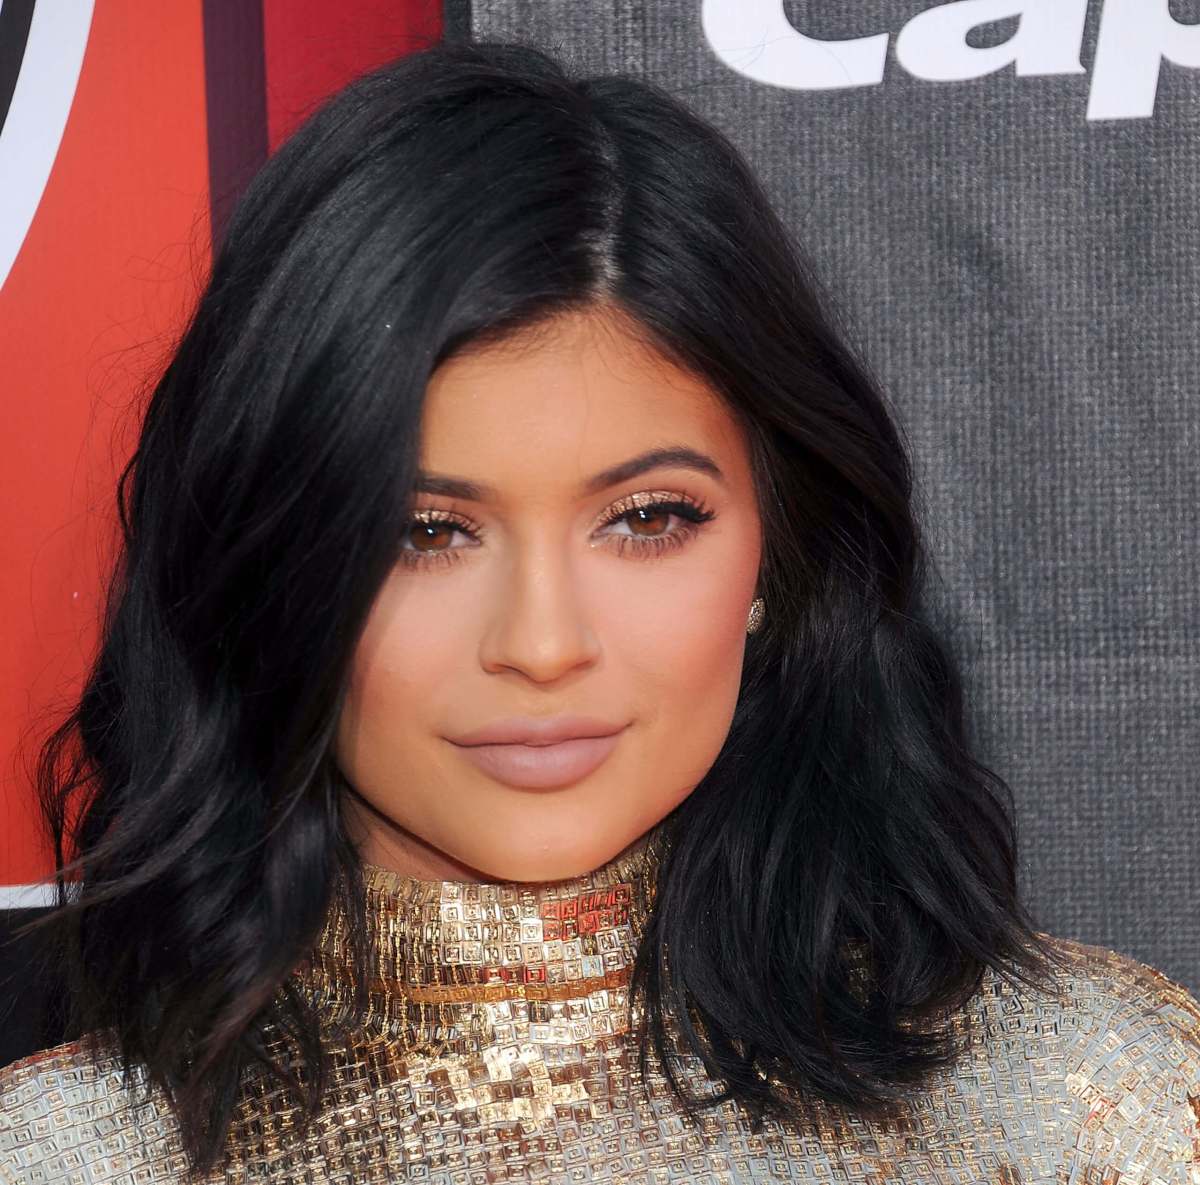 Kylie Jenner got paid $200,000 to go to a party